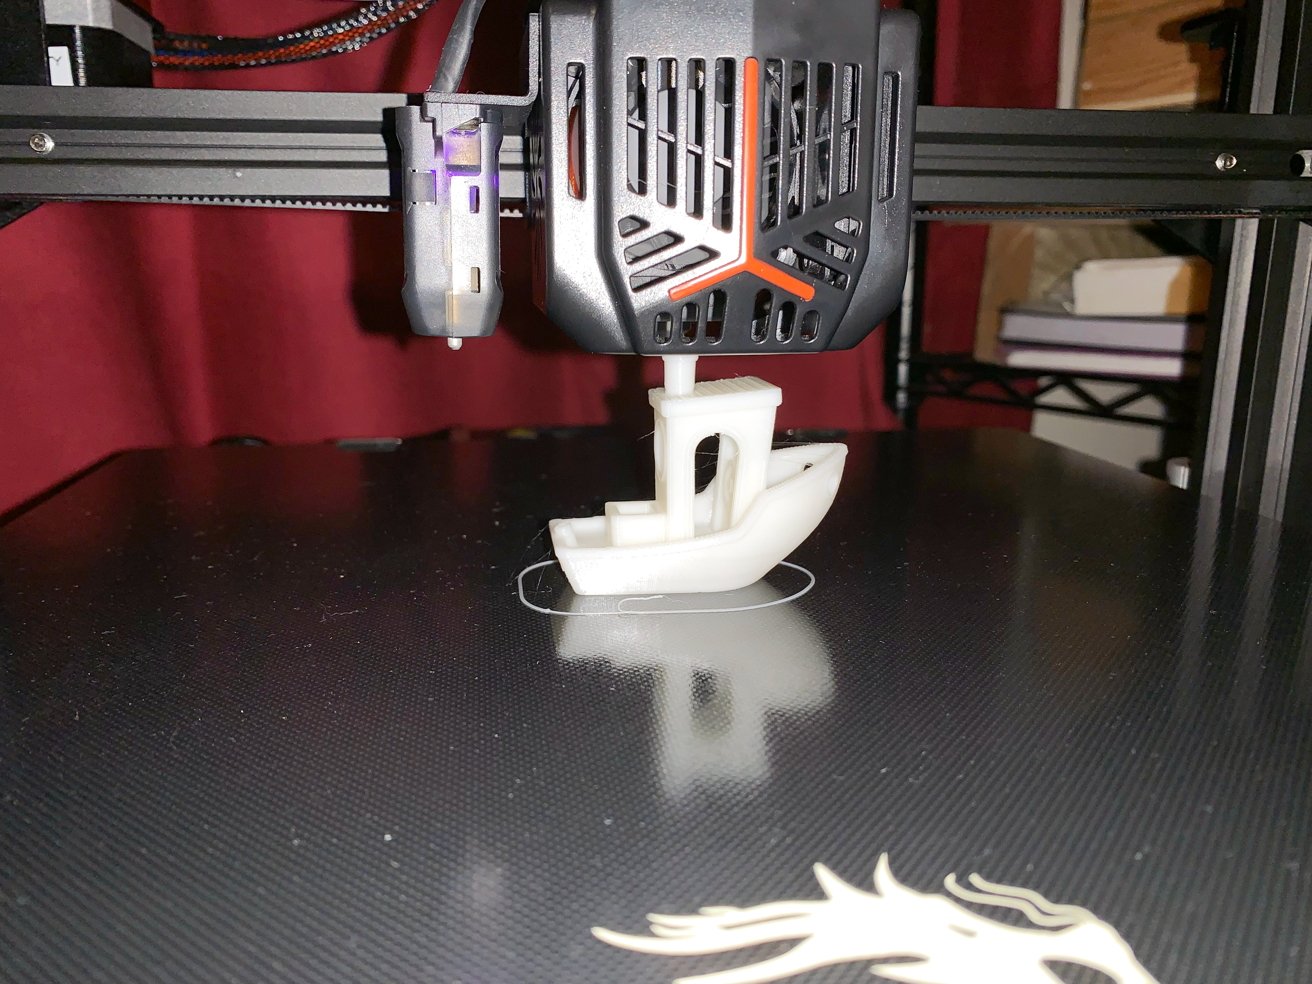 Printing 3DBenchie onto the textured glass build platform. Note the sensor used for the auto-level feature.